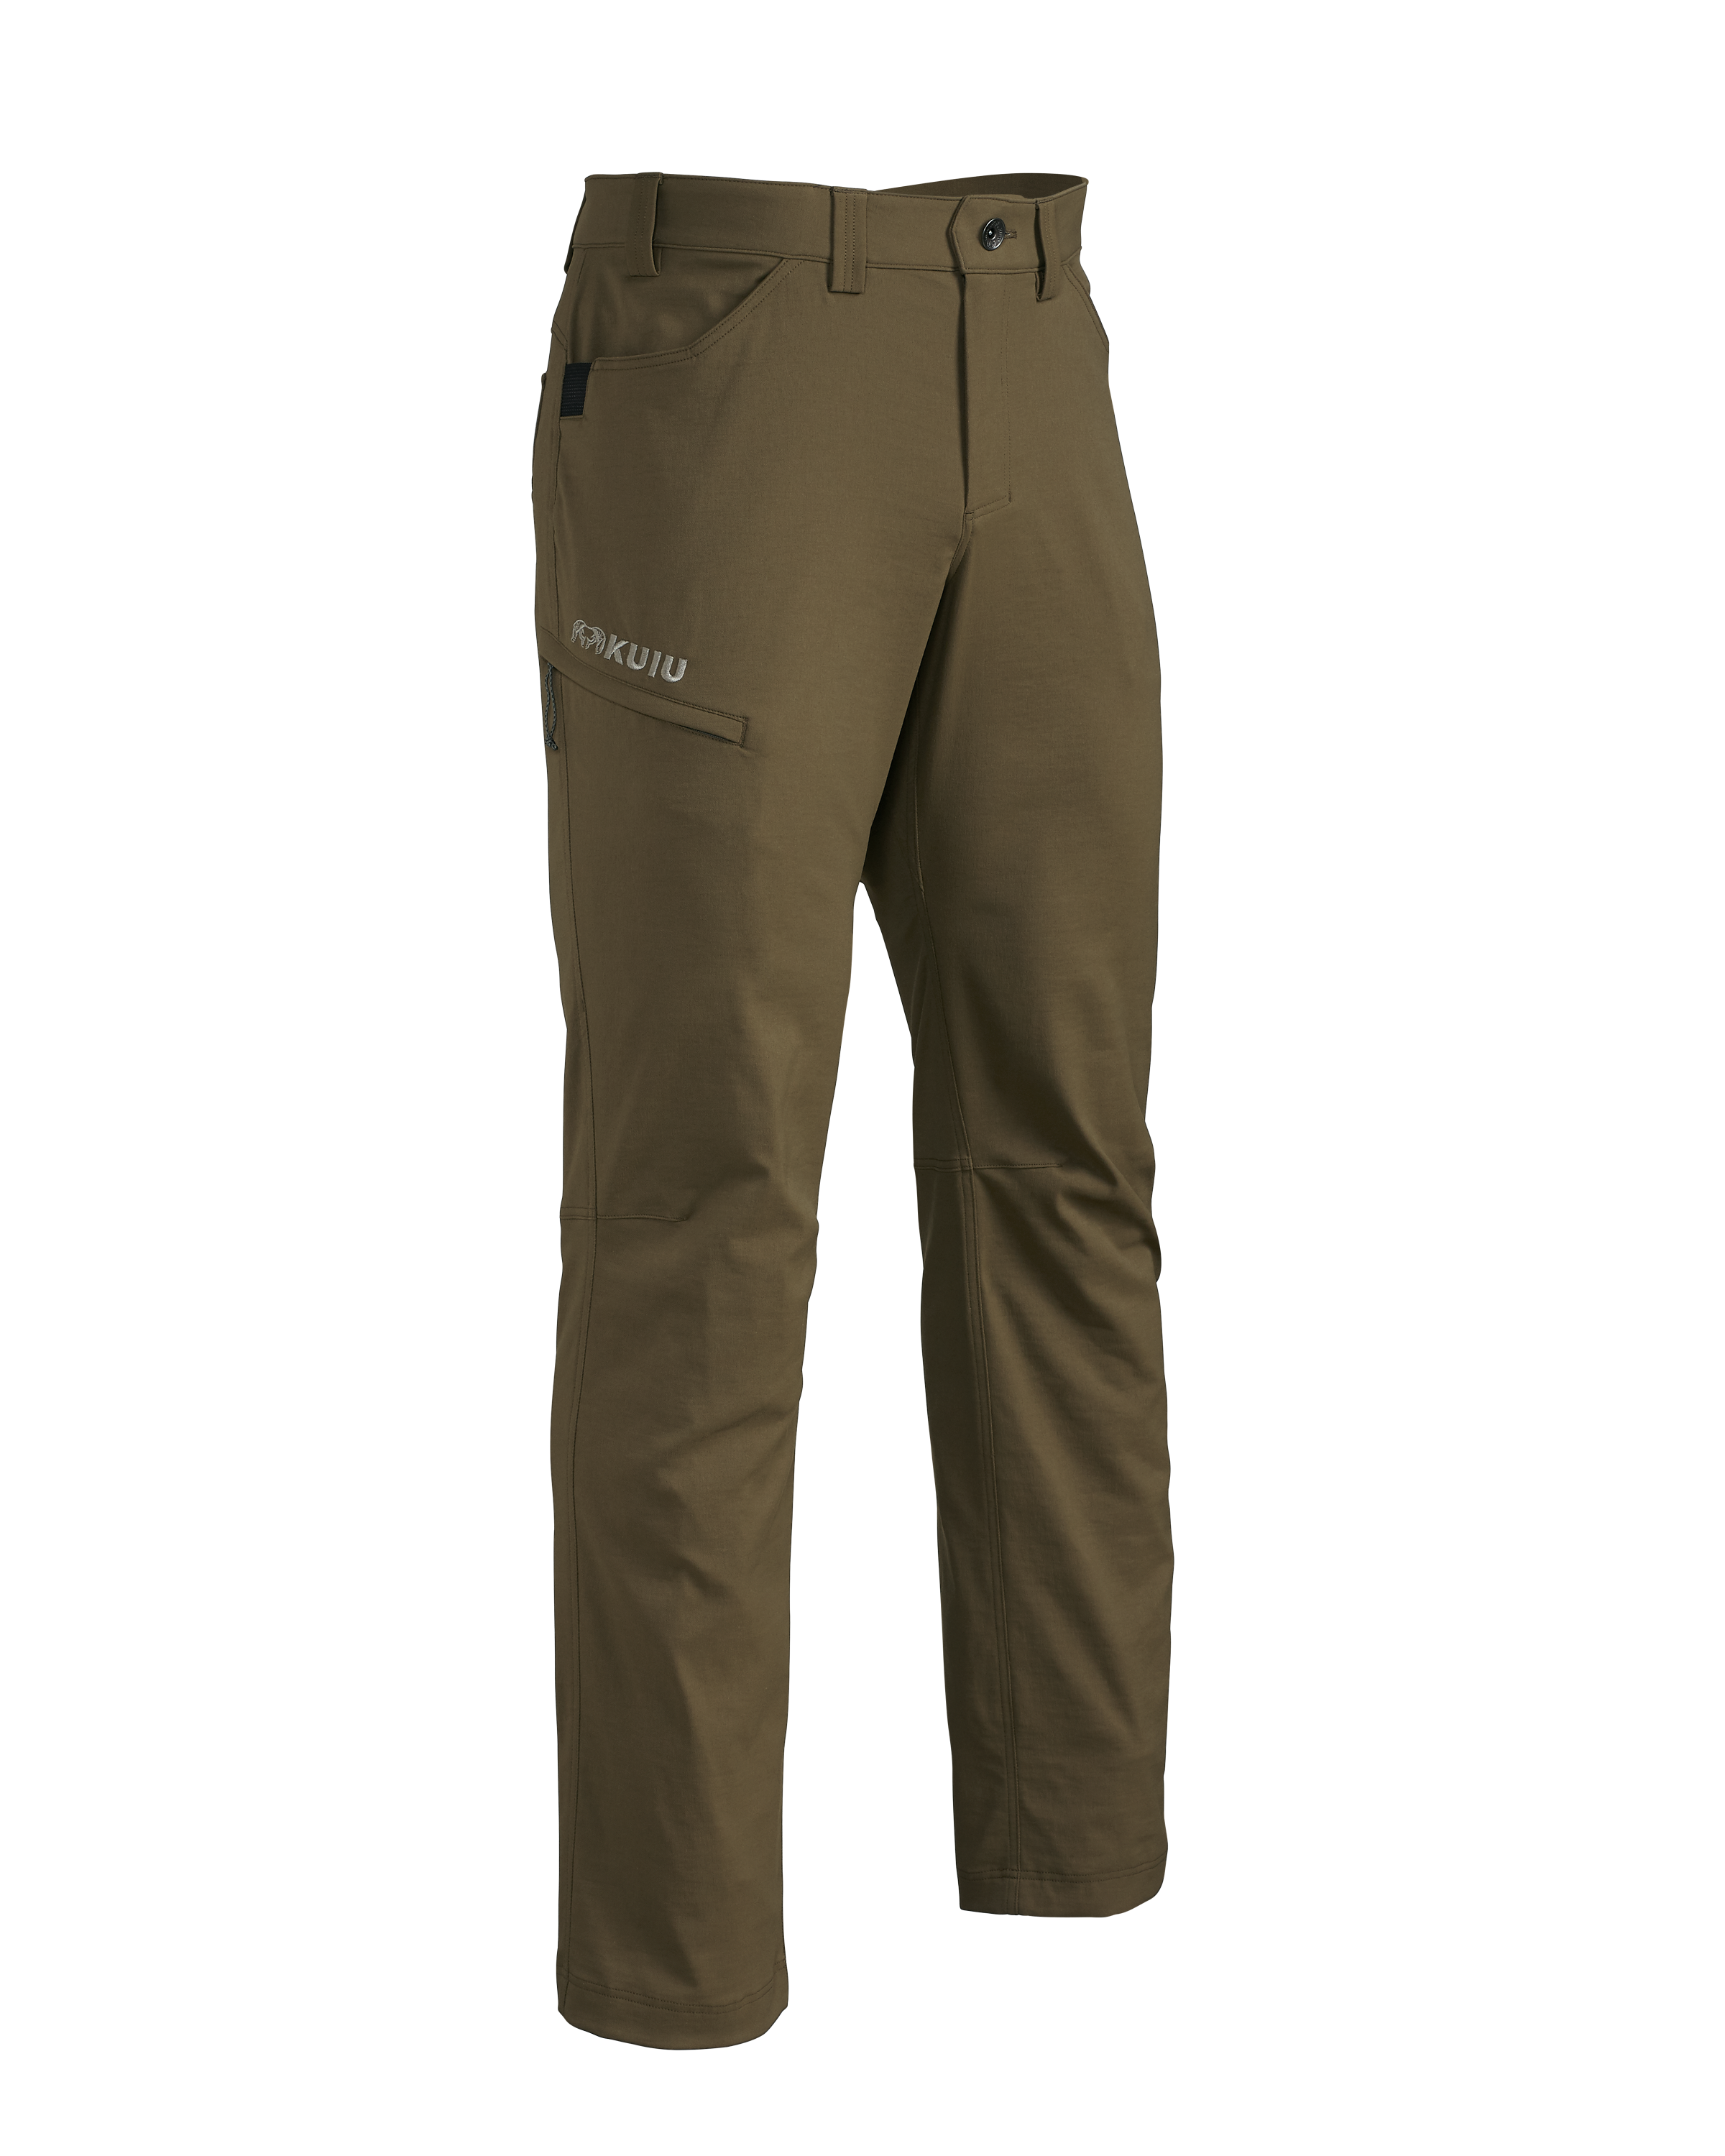 KUIU Switchback Hunting Pant in Bourbon | Size 34